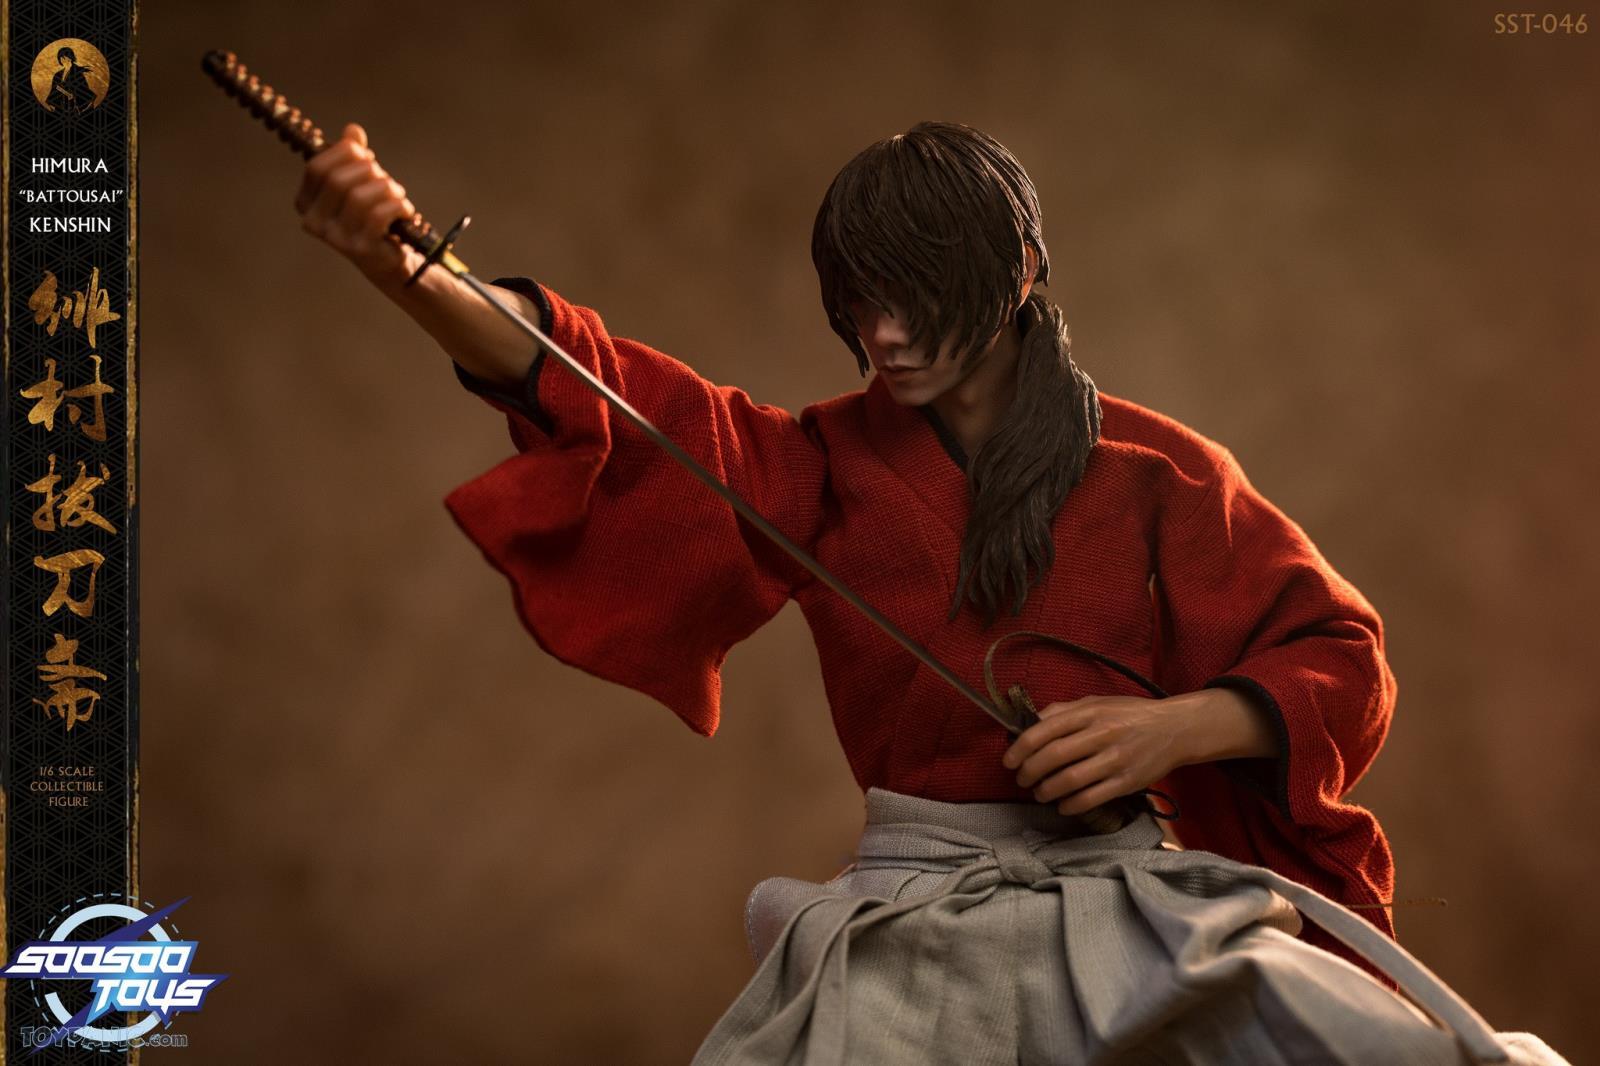 Japanese - NEW PRODUCT: 1/6 scale Rurouni Kenshin Collectible Figure from SooSooToys 712202251229PM_4050307